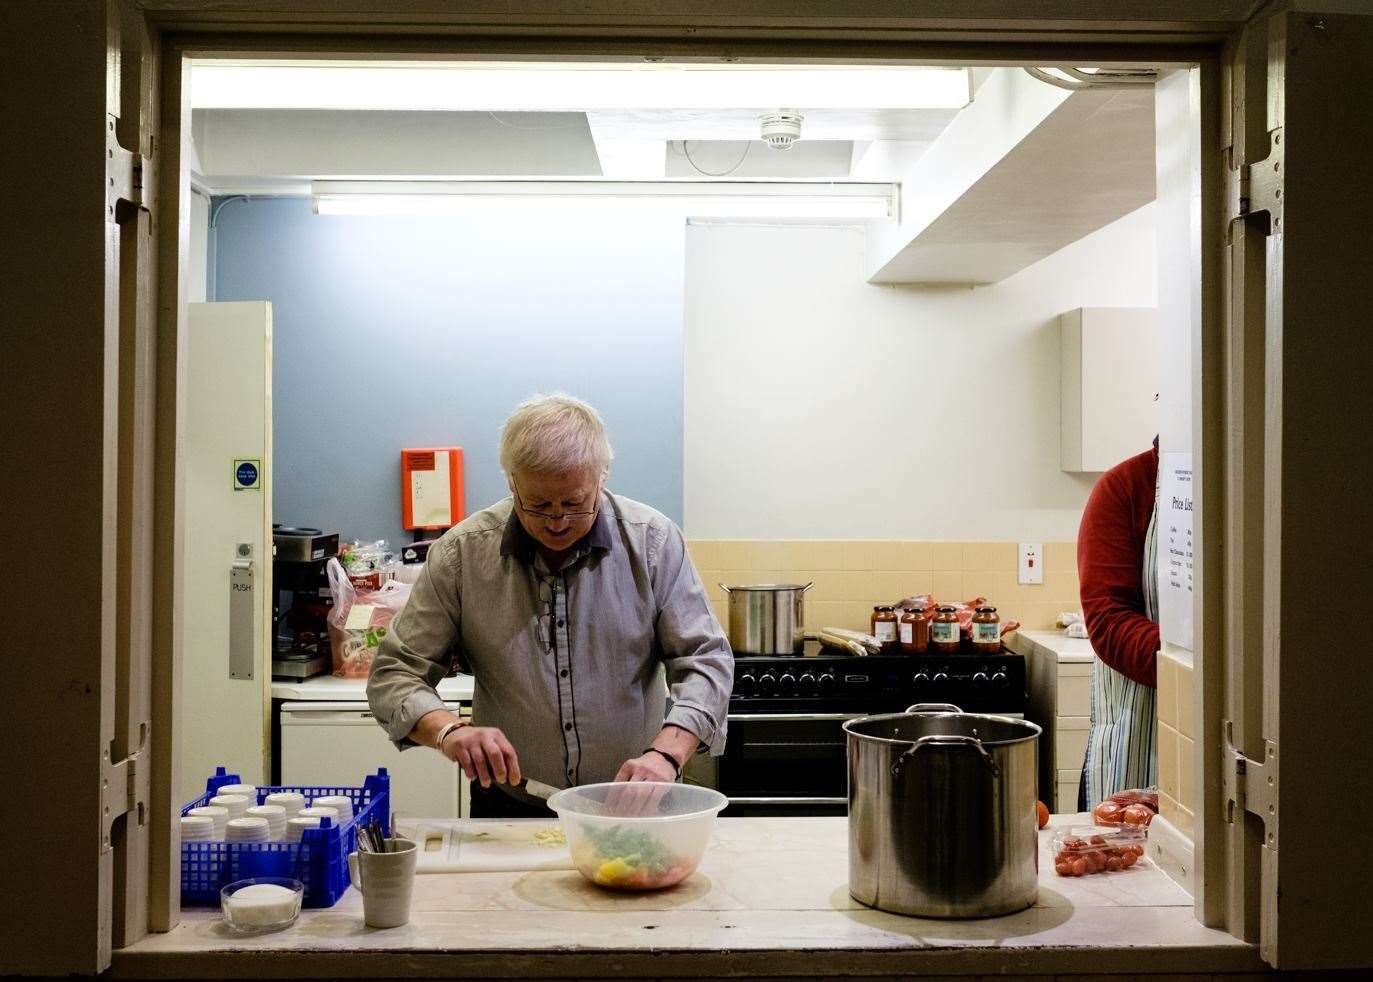 Long standing volunteer, Trevor Blake-Morris prepares a meal at the kitchen facility for the Gravesham Sanctuary